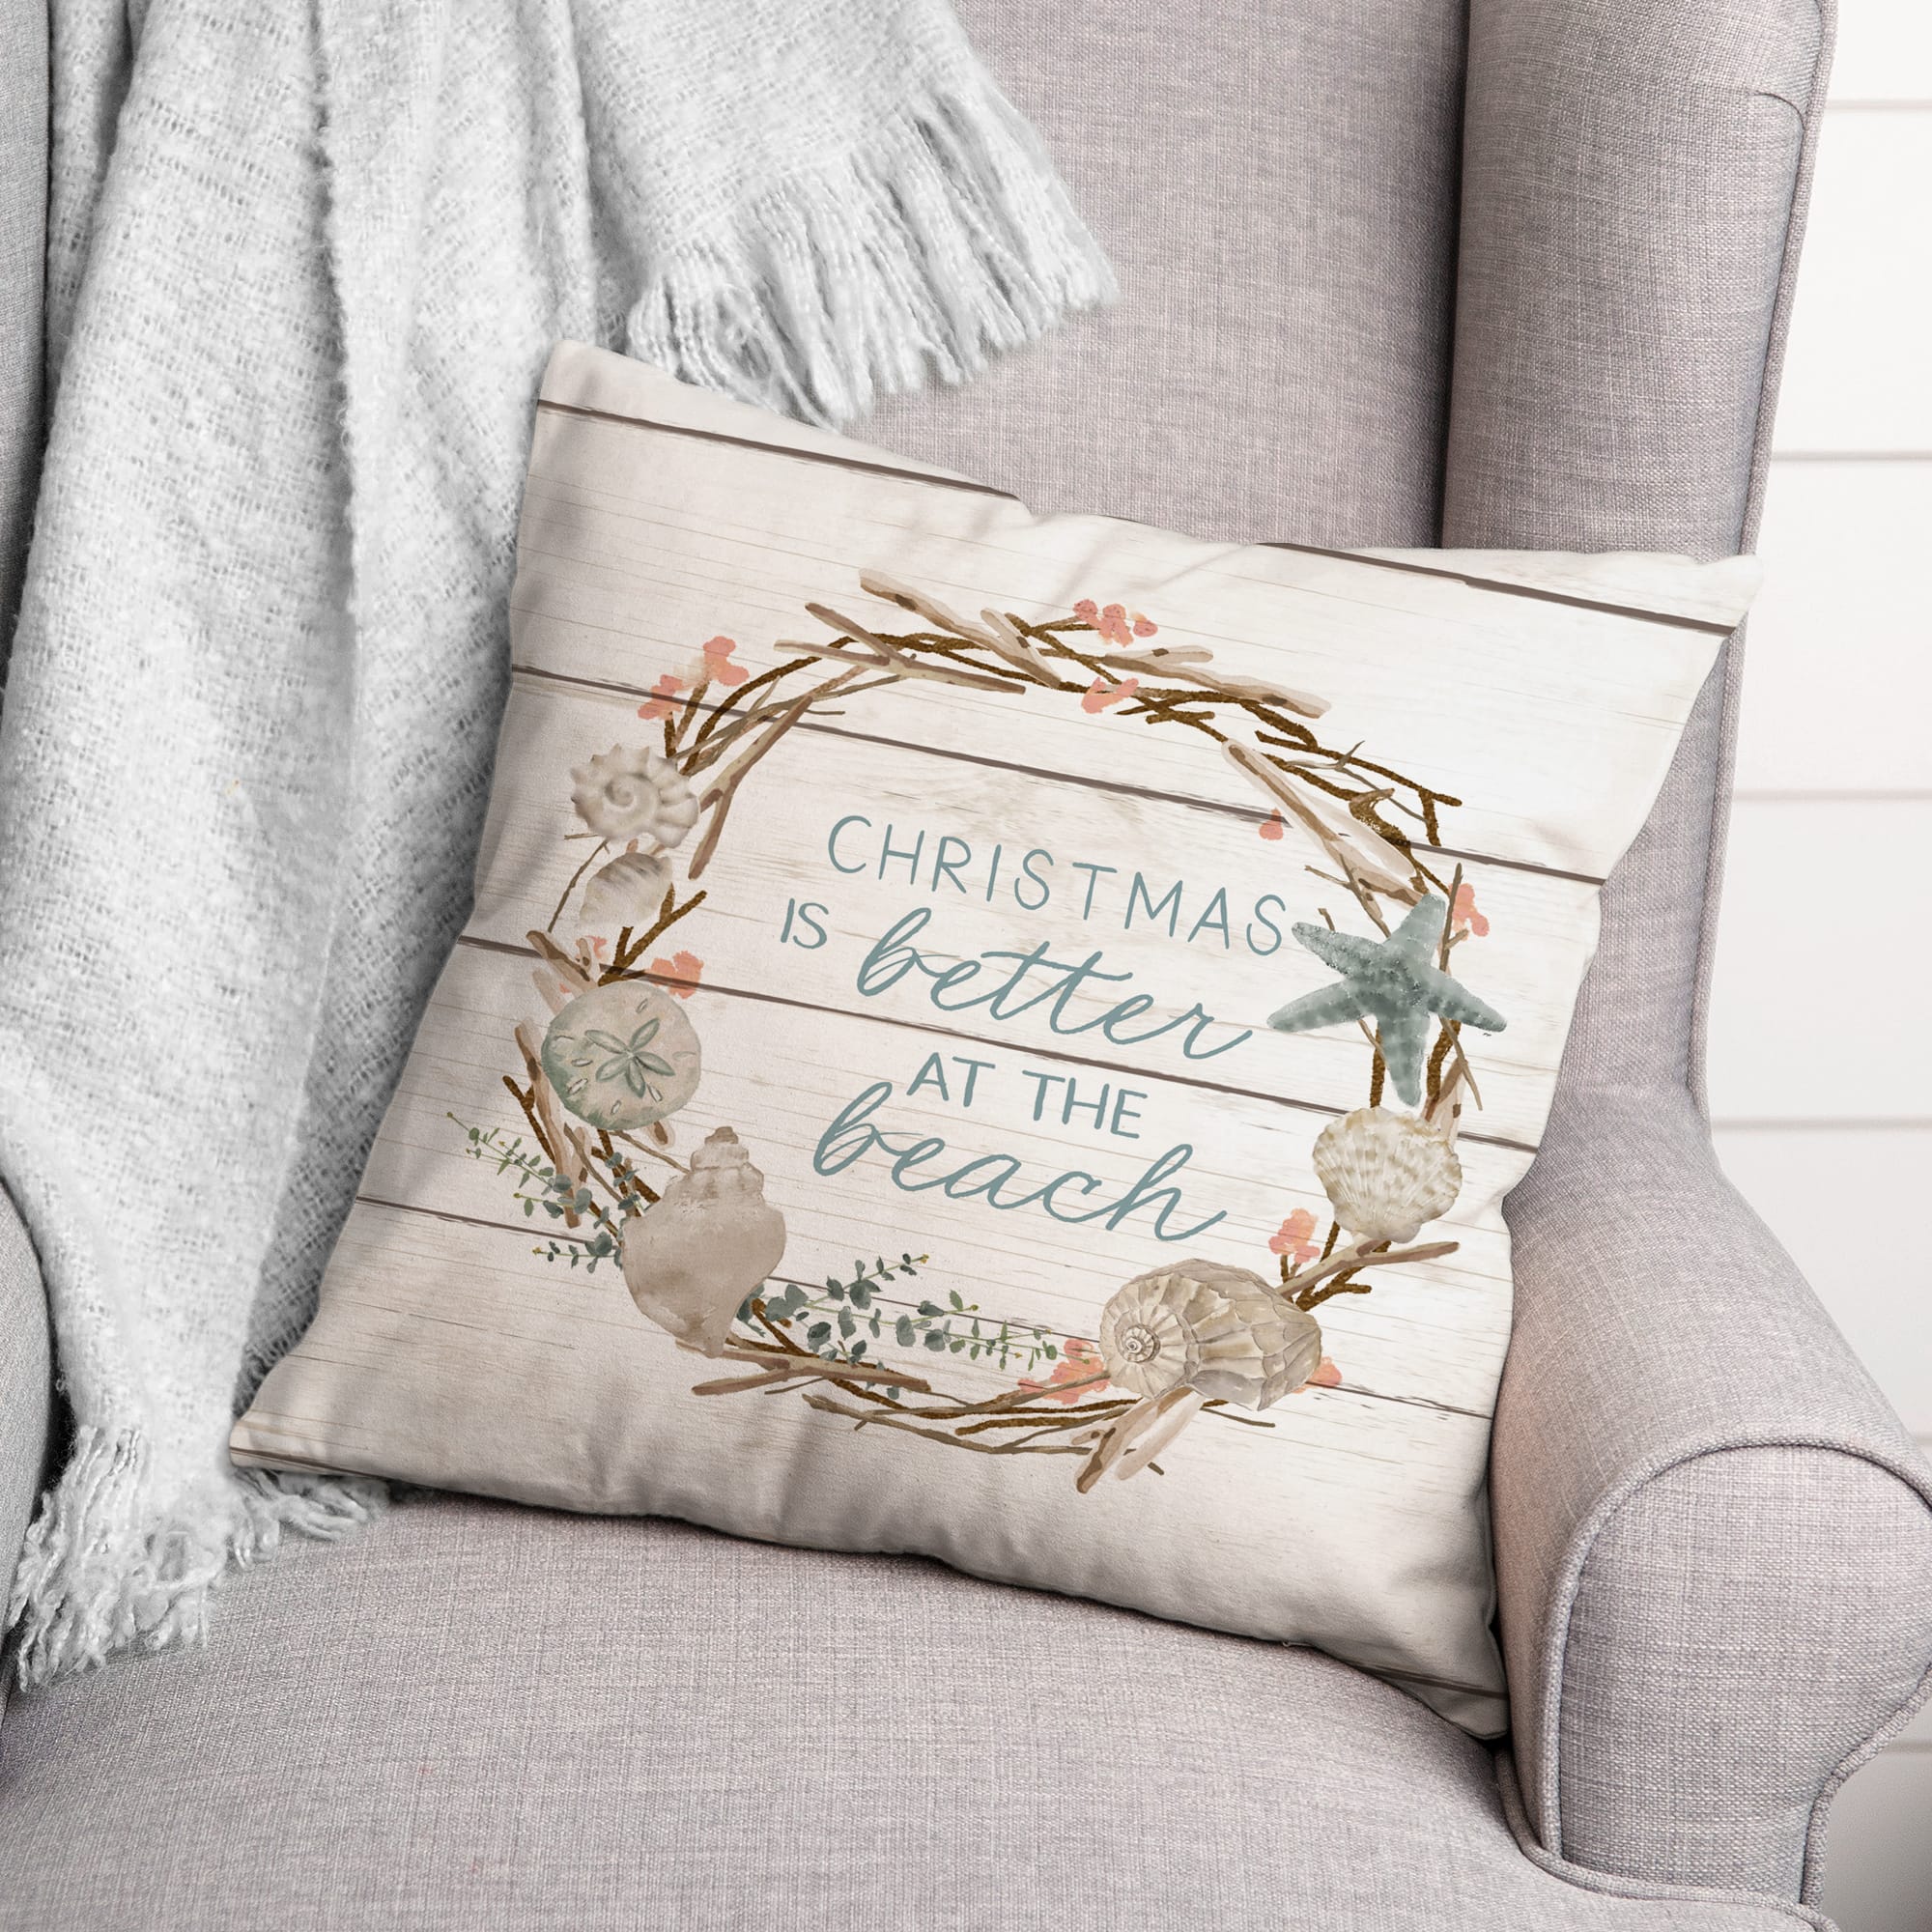 Christmas is Better by the Beach Throw Pillow